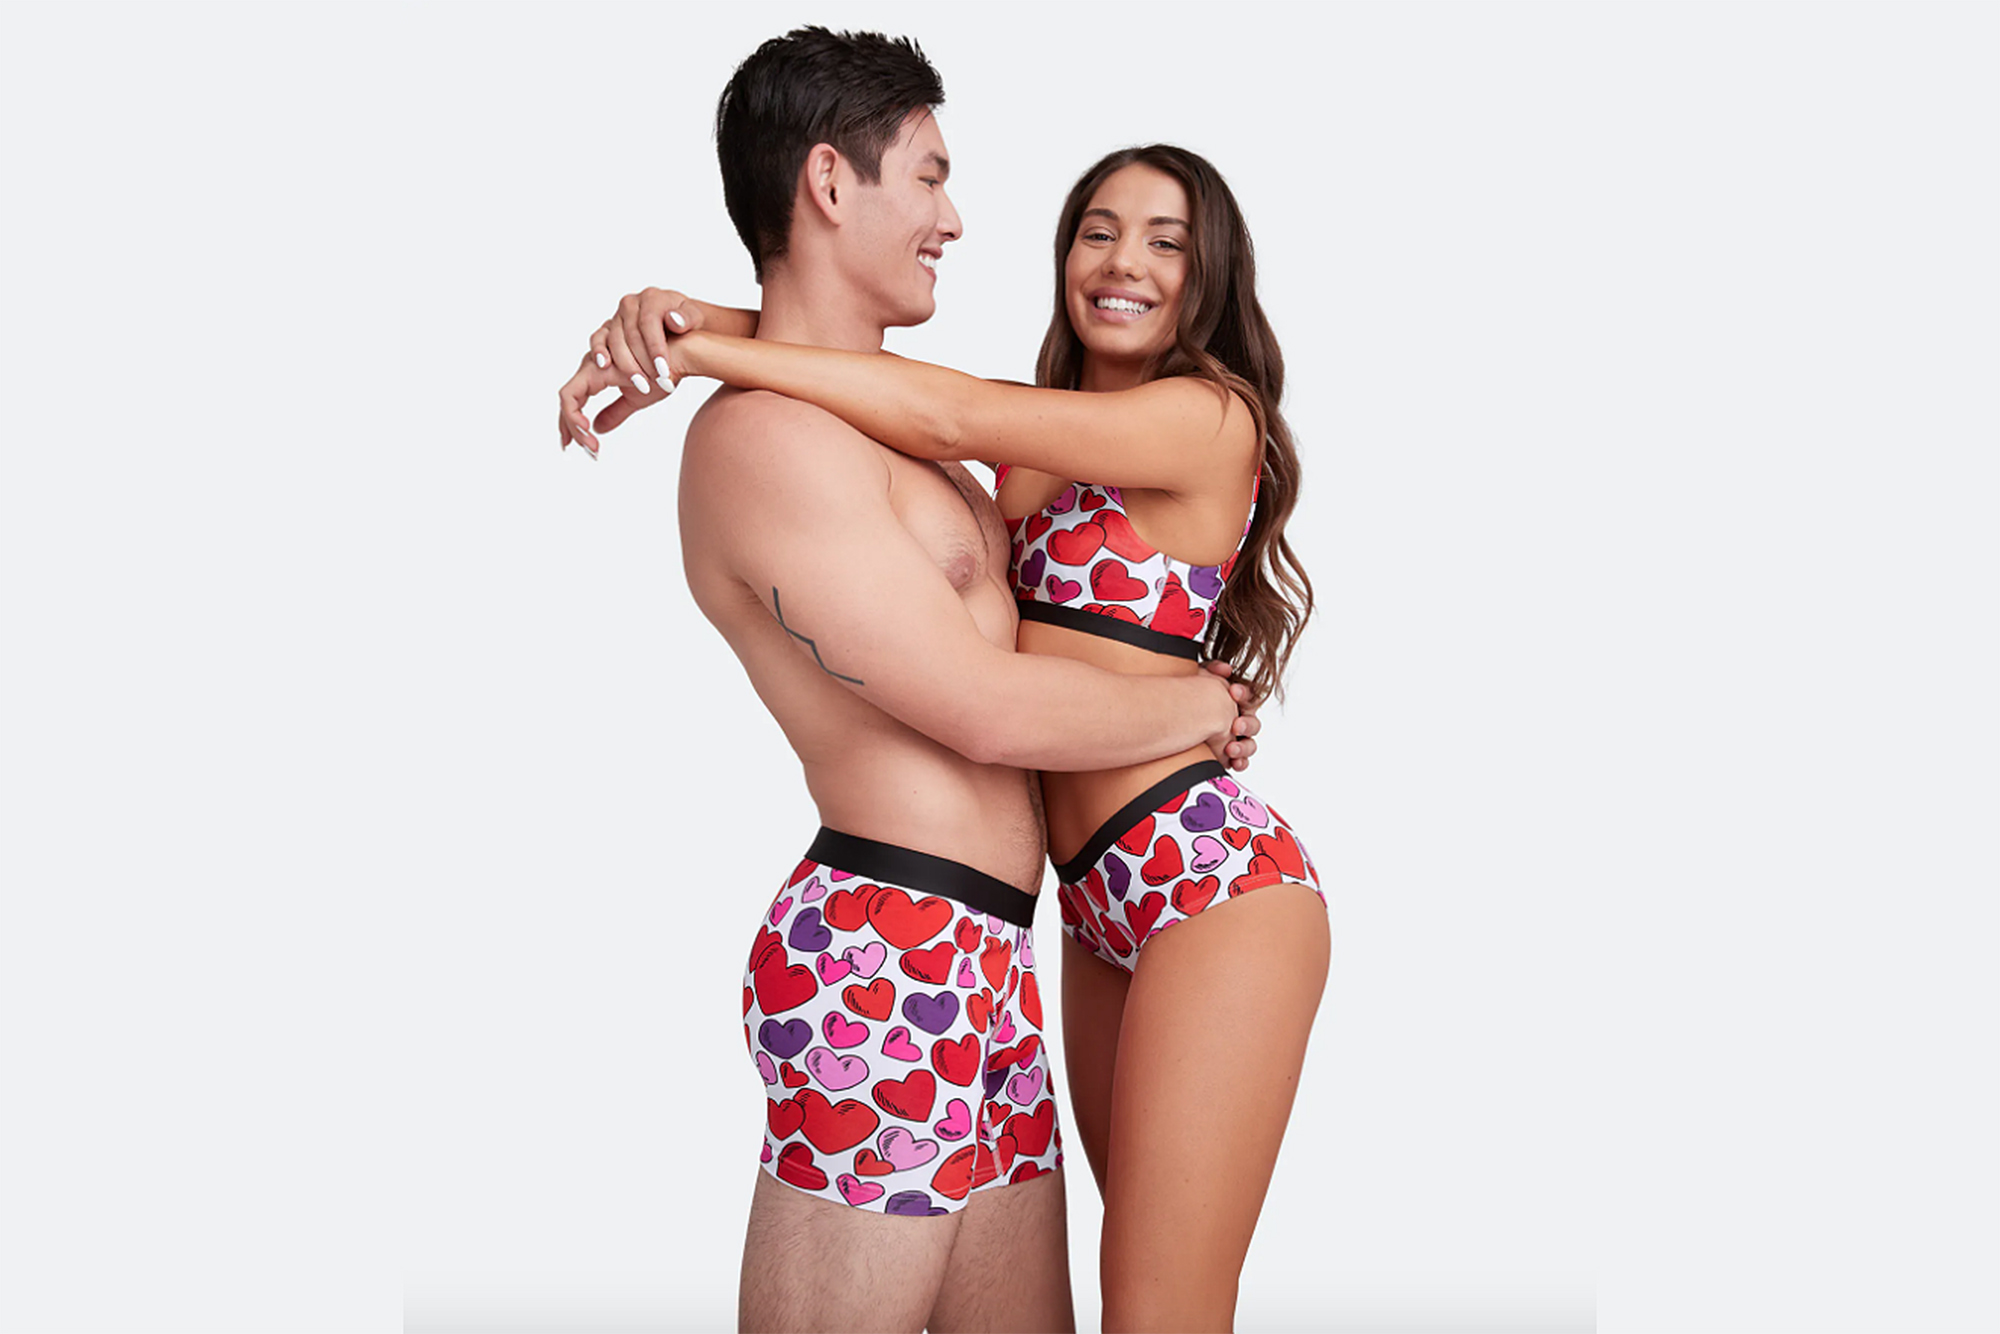 Make a memory this Valentine's Day with matching pairs of undies